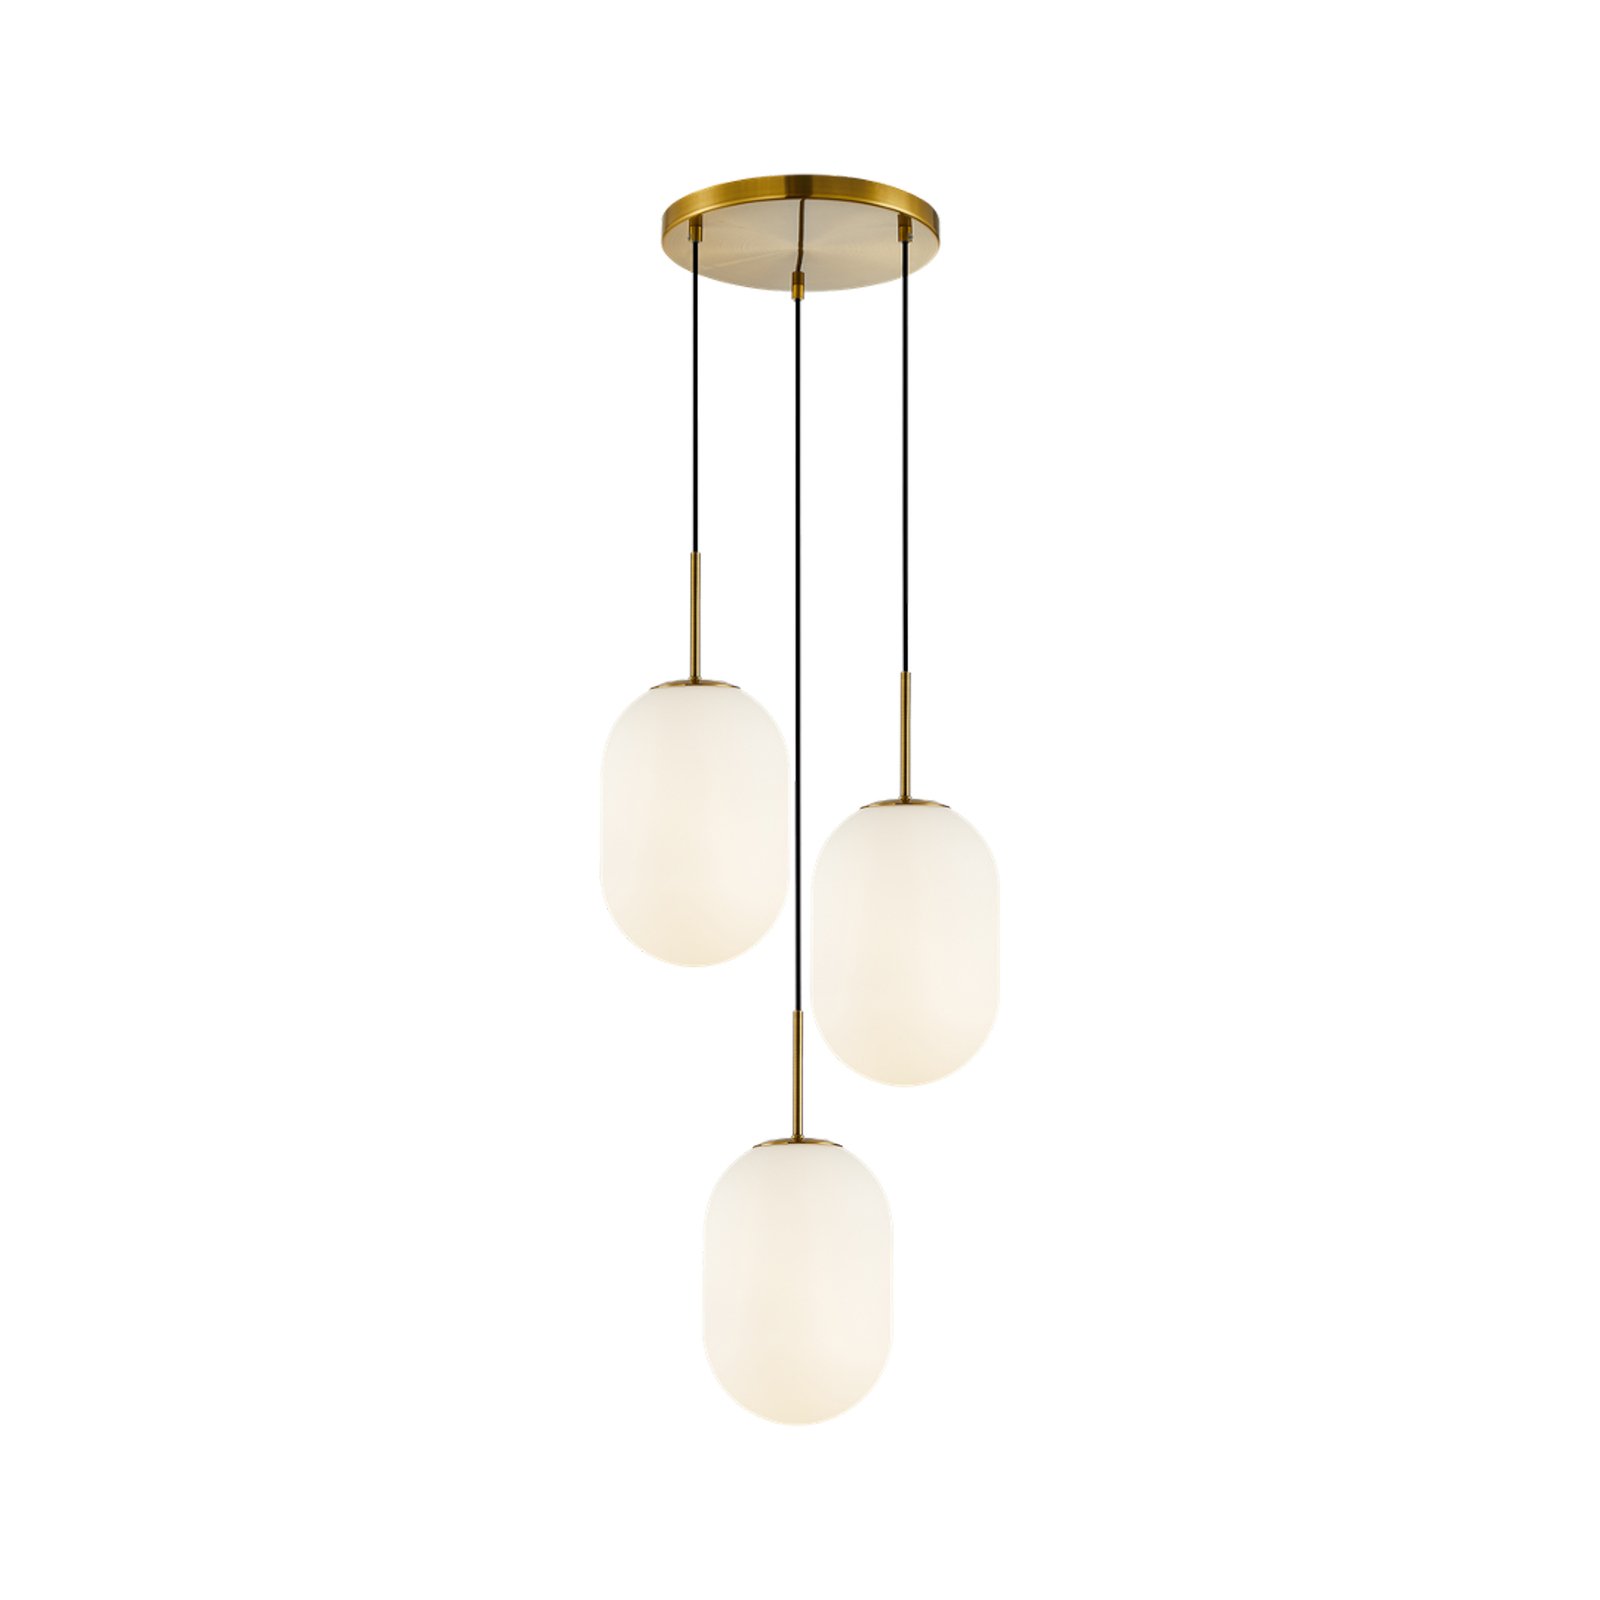 Hanging light Alias, metal gold-coloured opal glass, 3-bulb round